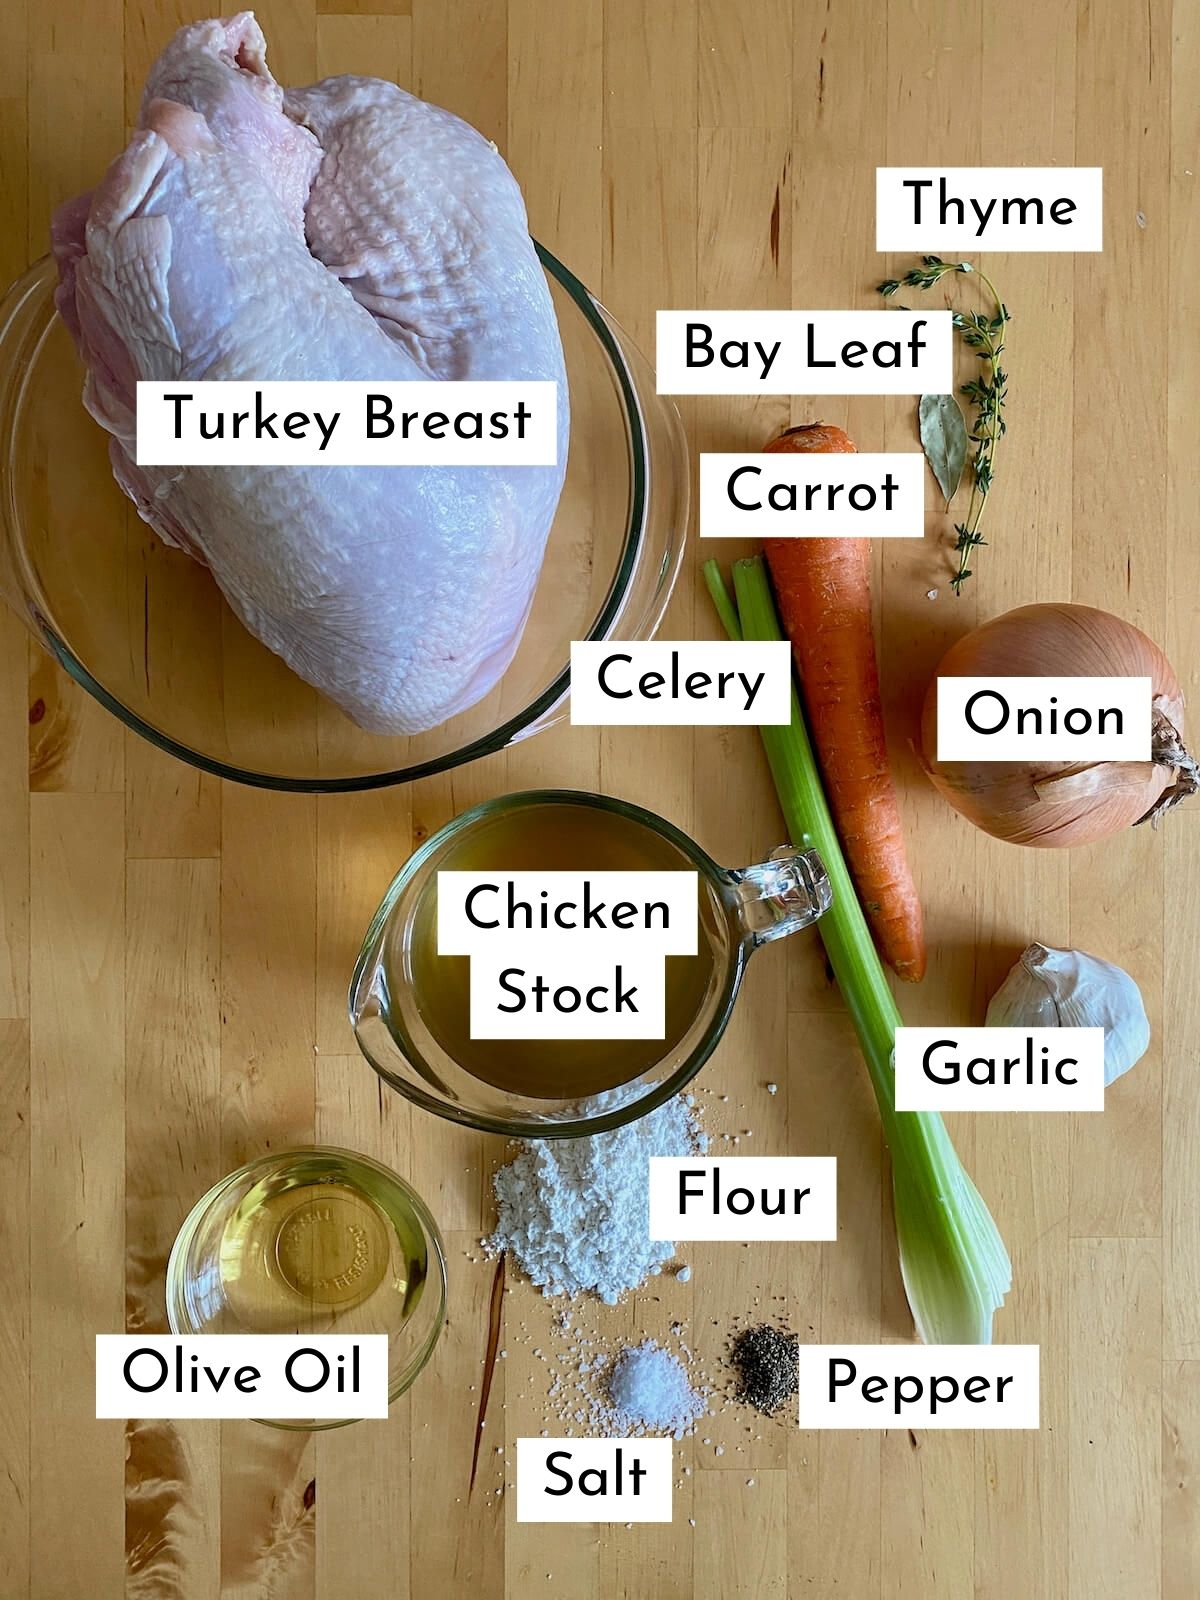 The ingredients to make dutch oven turkey breast on a butcher block countertop. Each ingredient is labeled with text stating what it is. They include turkey breast, bay leaf, thyme, carrot, celery, onion, chicken stock, garlic, olive oil, flour, salt, and pepper.